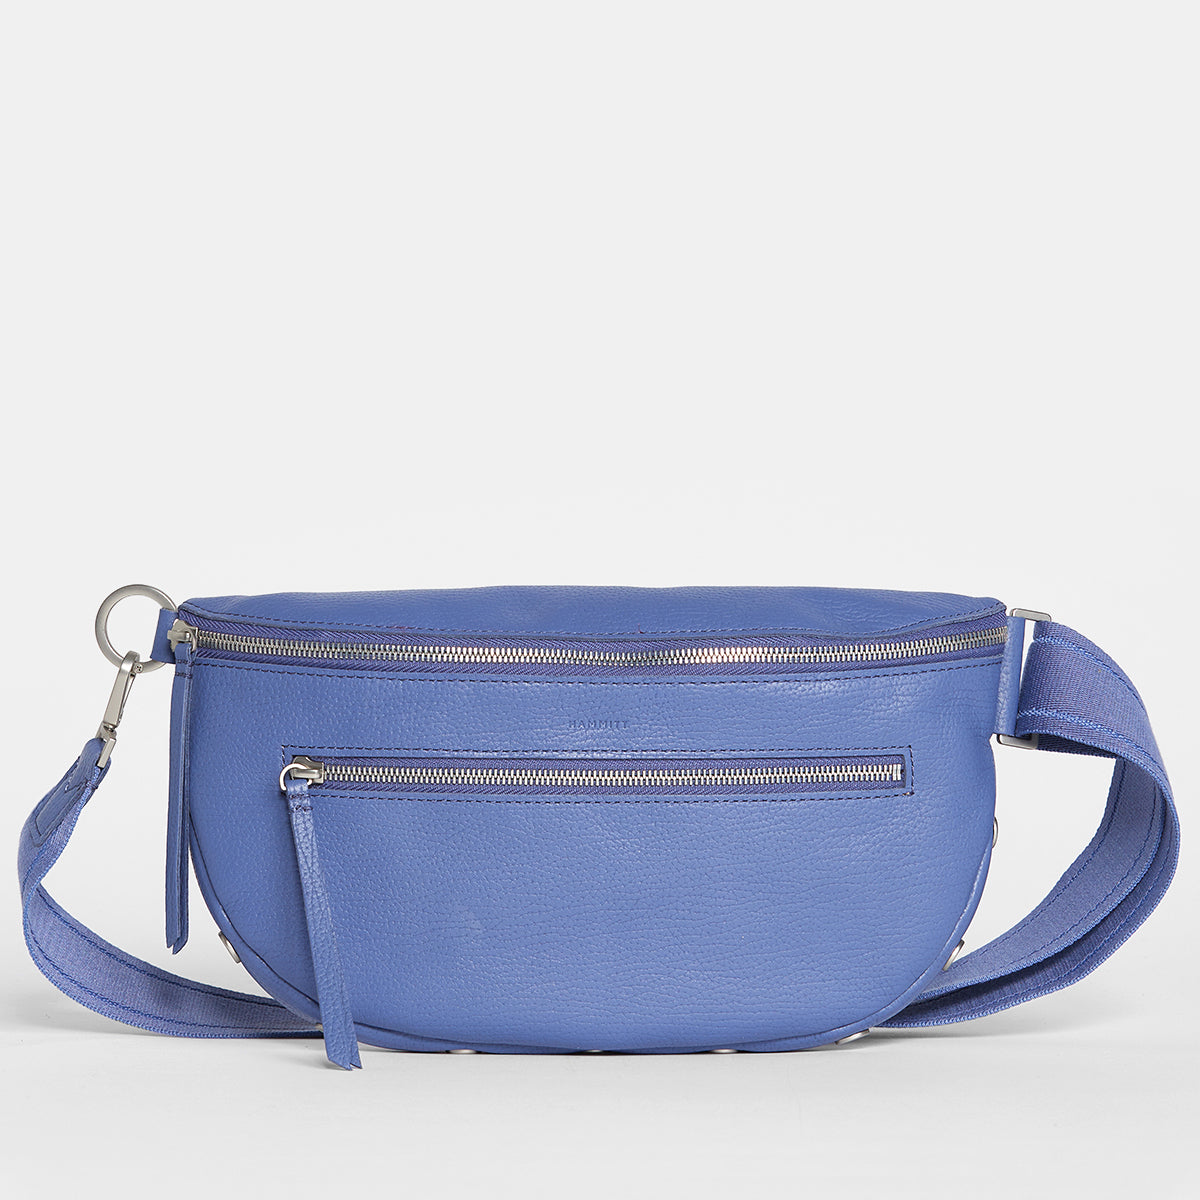 Charles-Crossbody-Lrg-Bungalow-Blue-Front-View